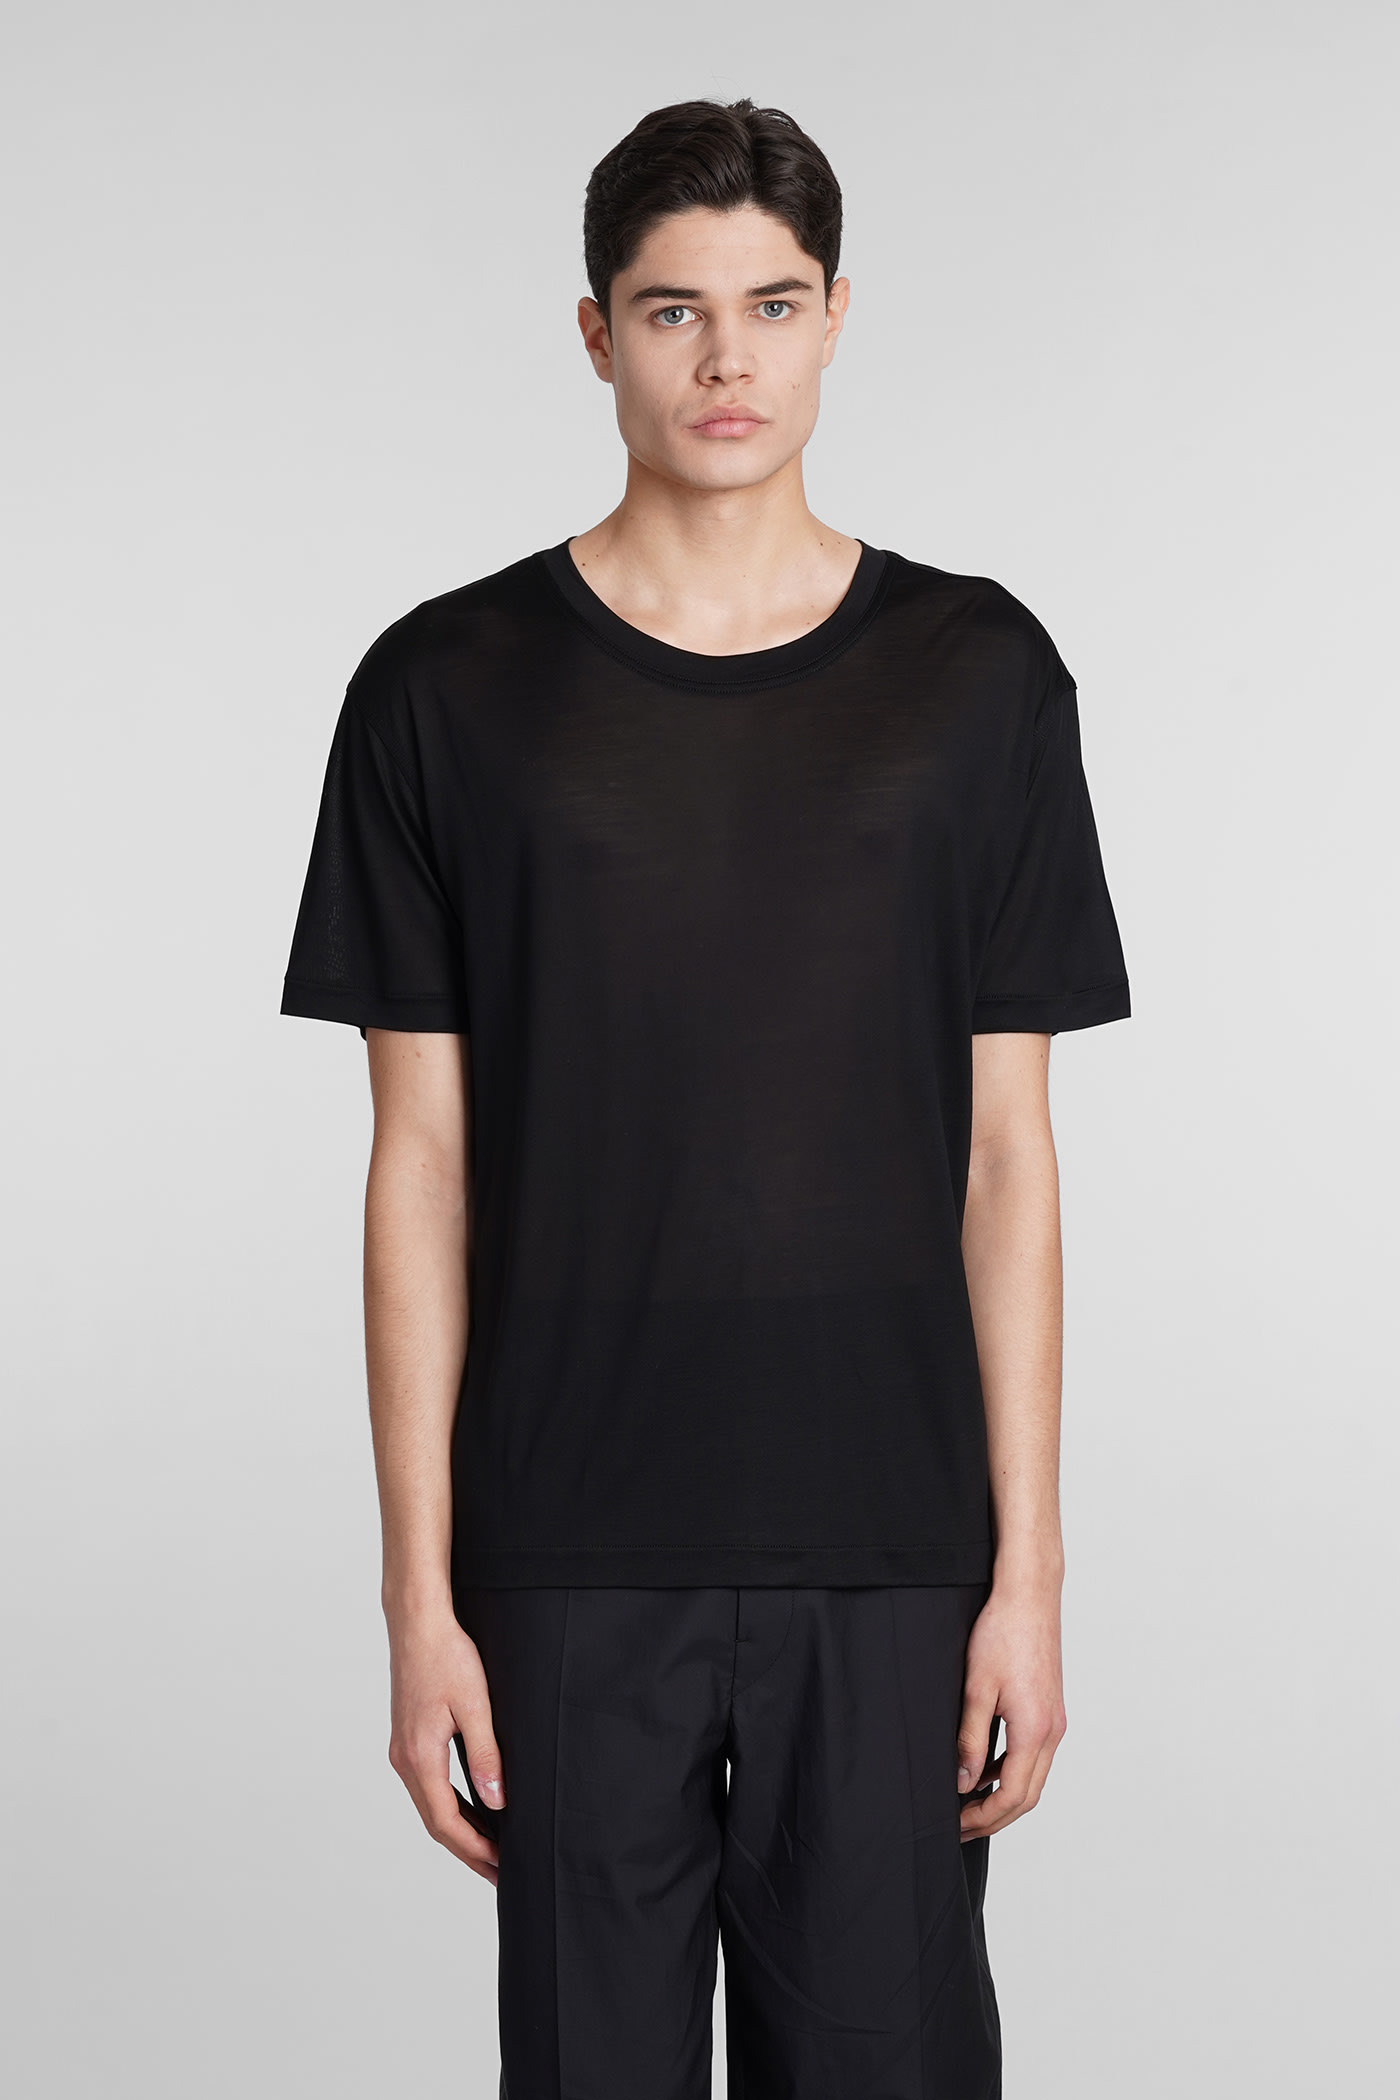 LEMAIRE T-SHIRT IN BLACK SILK